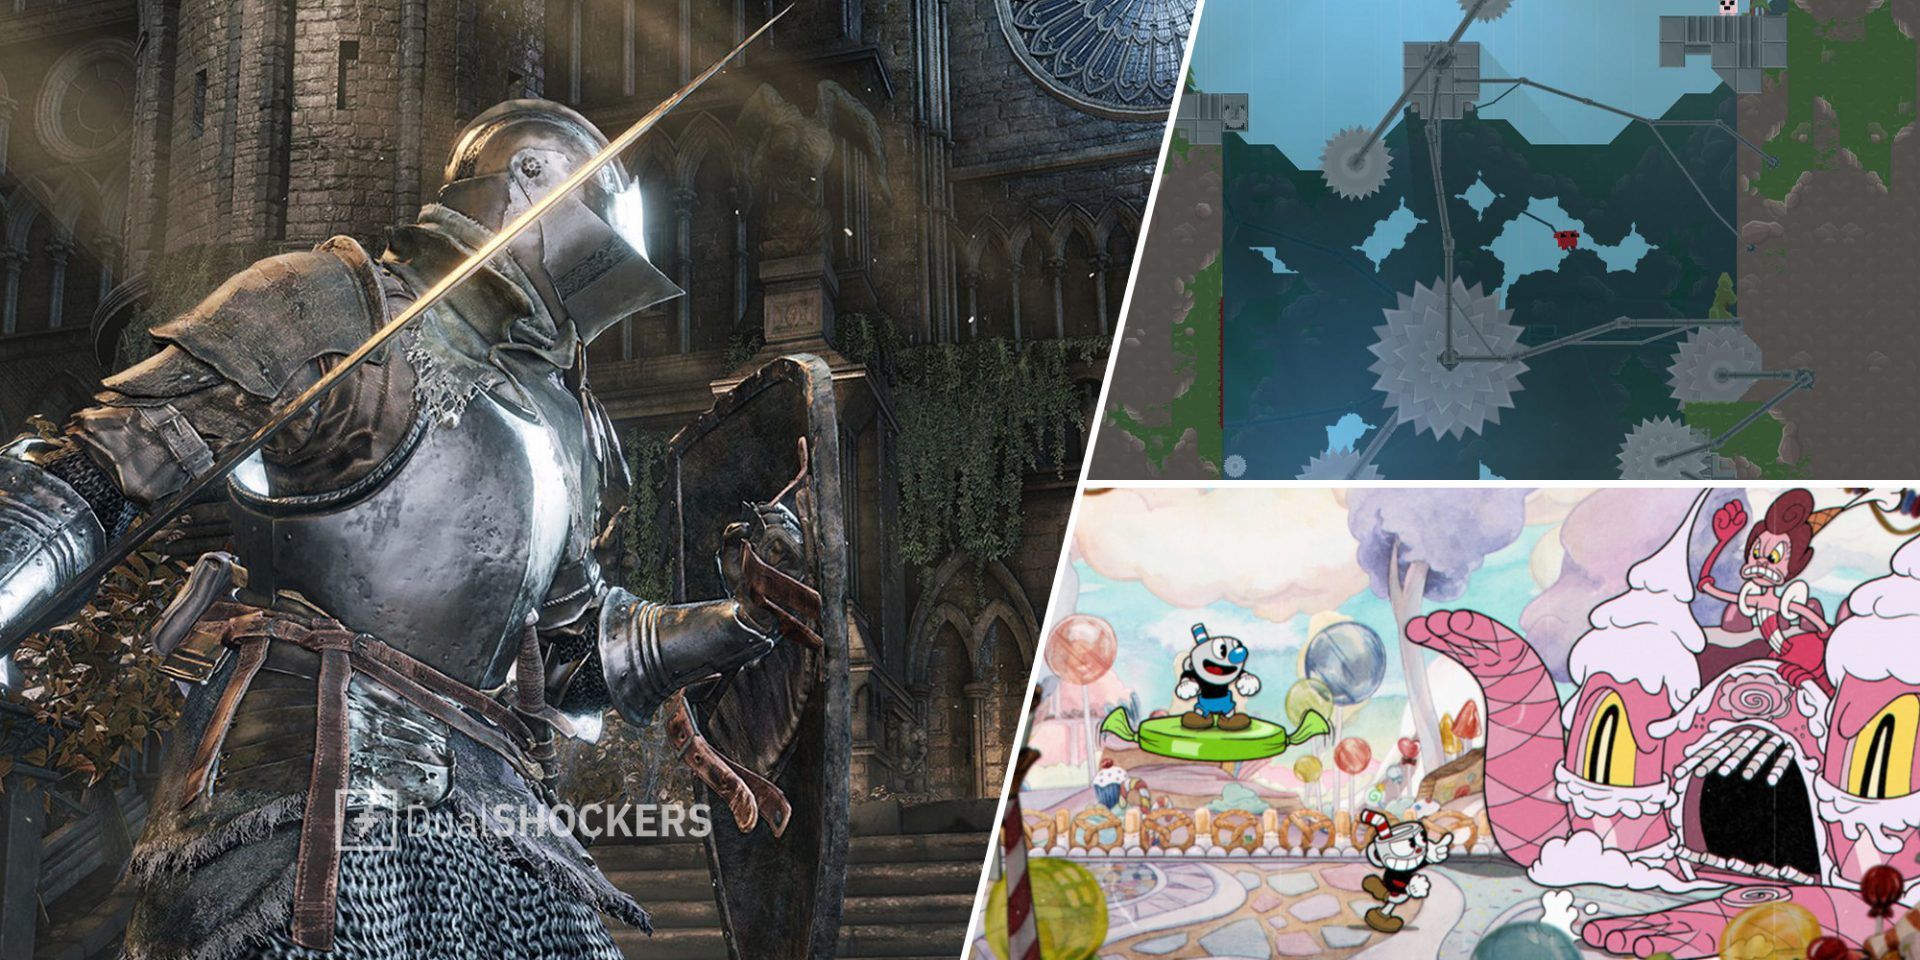 Hardest Video Games 2022: These are the 10 most difficult games of